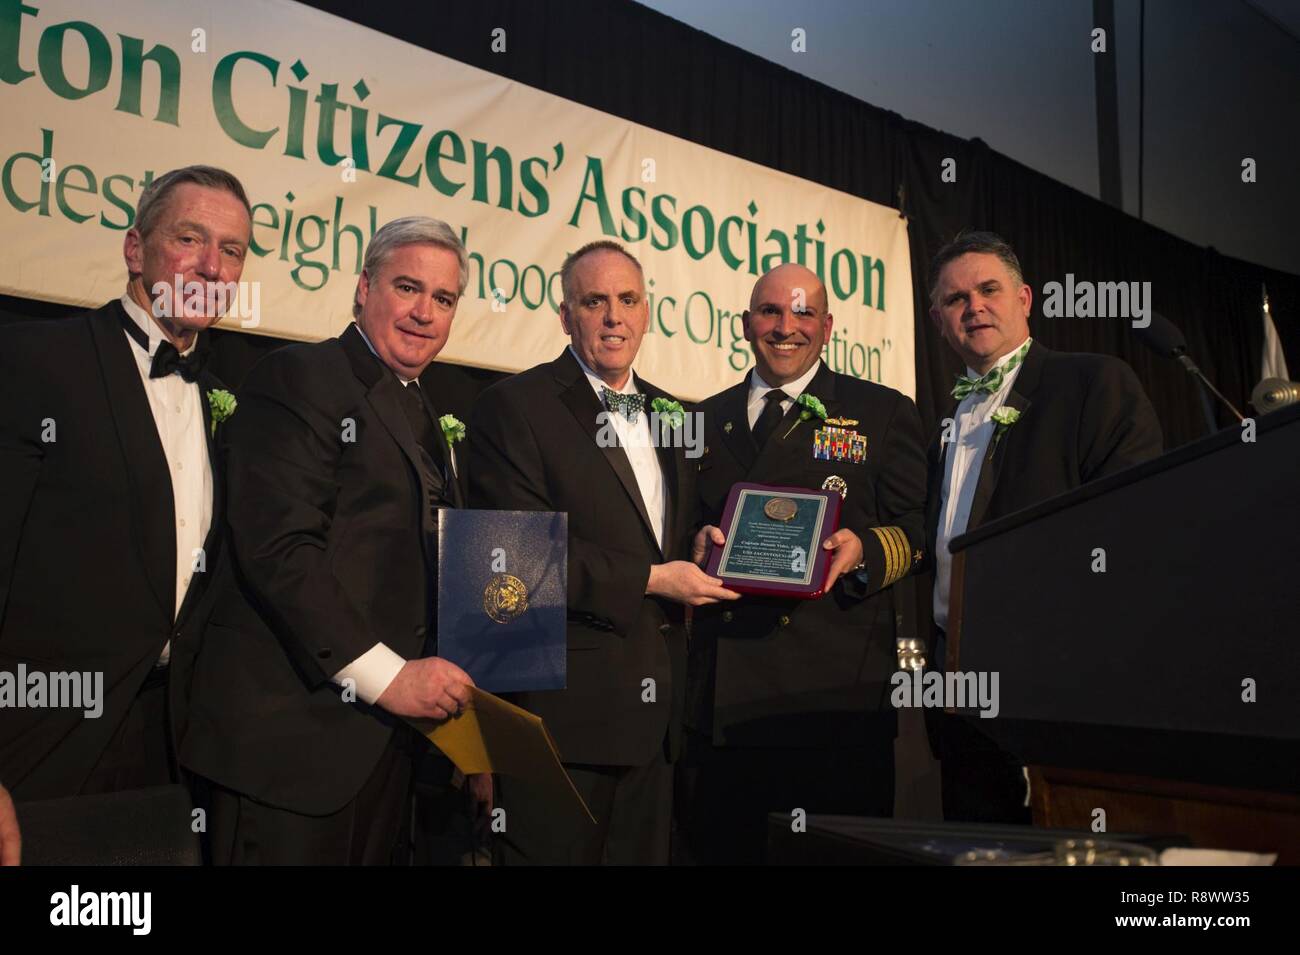 BOSTON (March 17, 2017) The guide-missile cruiser USS San Jacinto (CG 56) Commanding Officer Capt. Dennis Velez is receives an appreciation award by the South Boston Citizen’s Association Evacuation Day Banquet. USS San Jacinto (CG 56) participates in Boston's, St. Patrick’s Day festivities and community programs throughout the city. Stock Photo